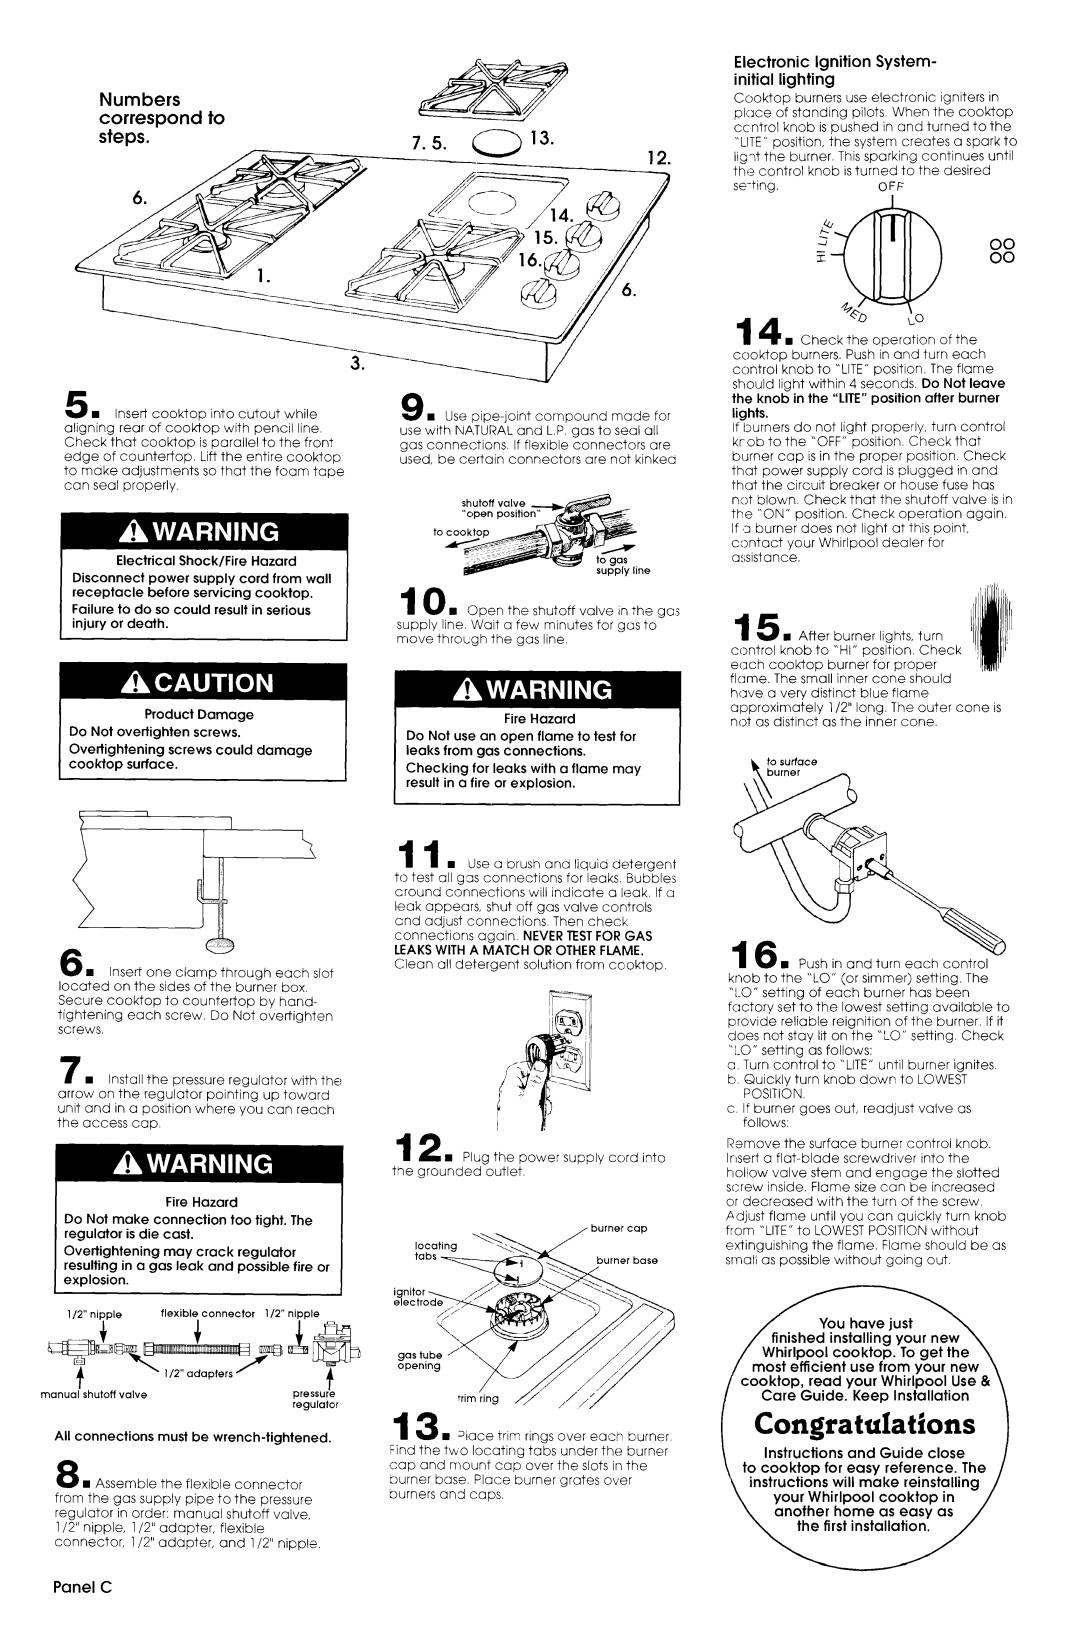 Whirlpool SC 8630 installation instructions Numbers correst3ond to, Congratulations 